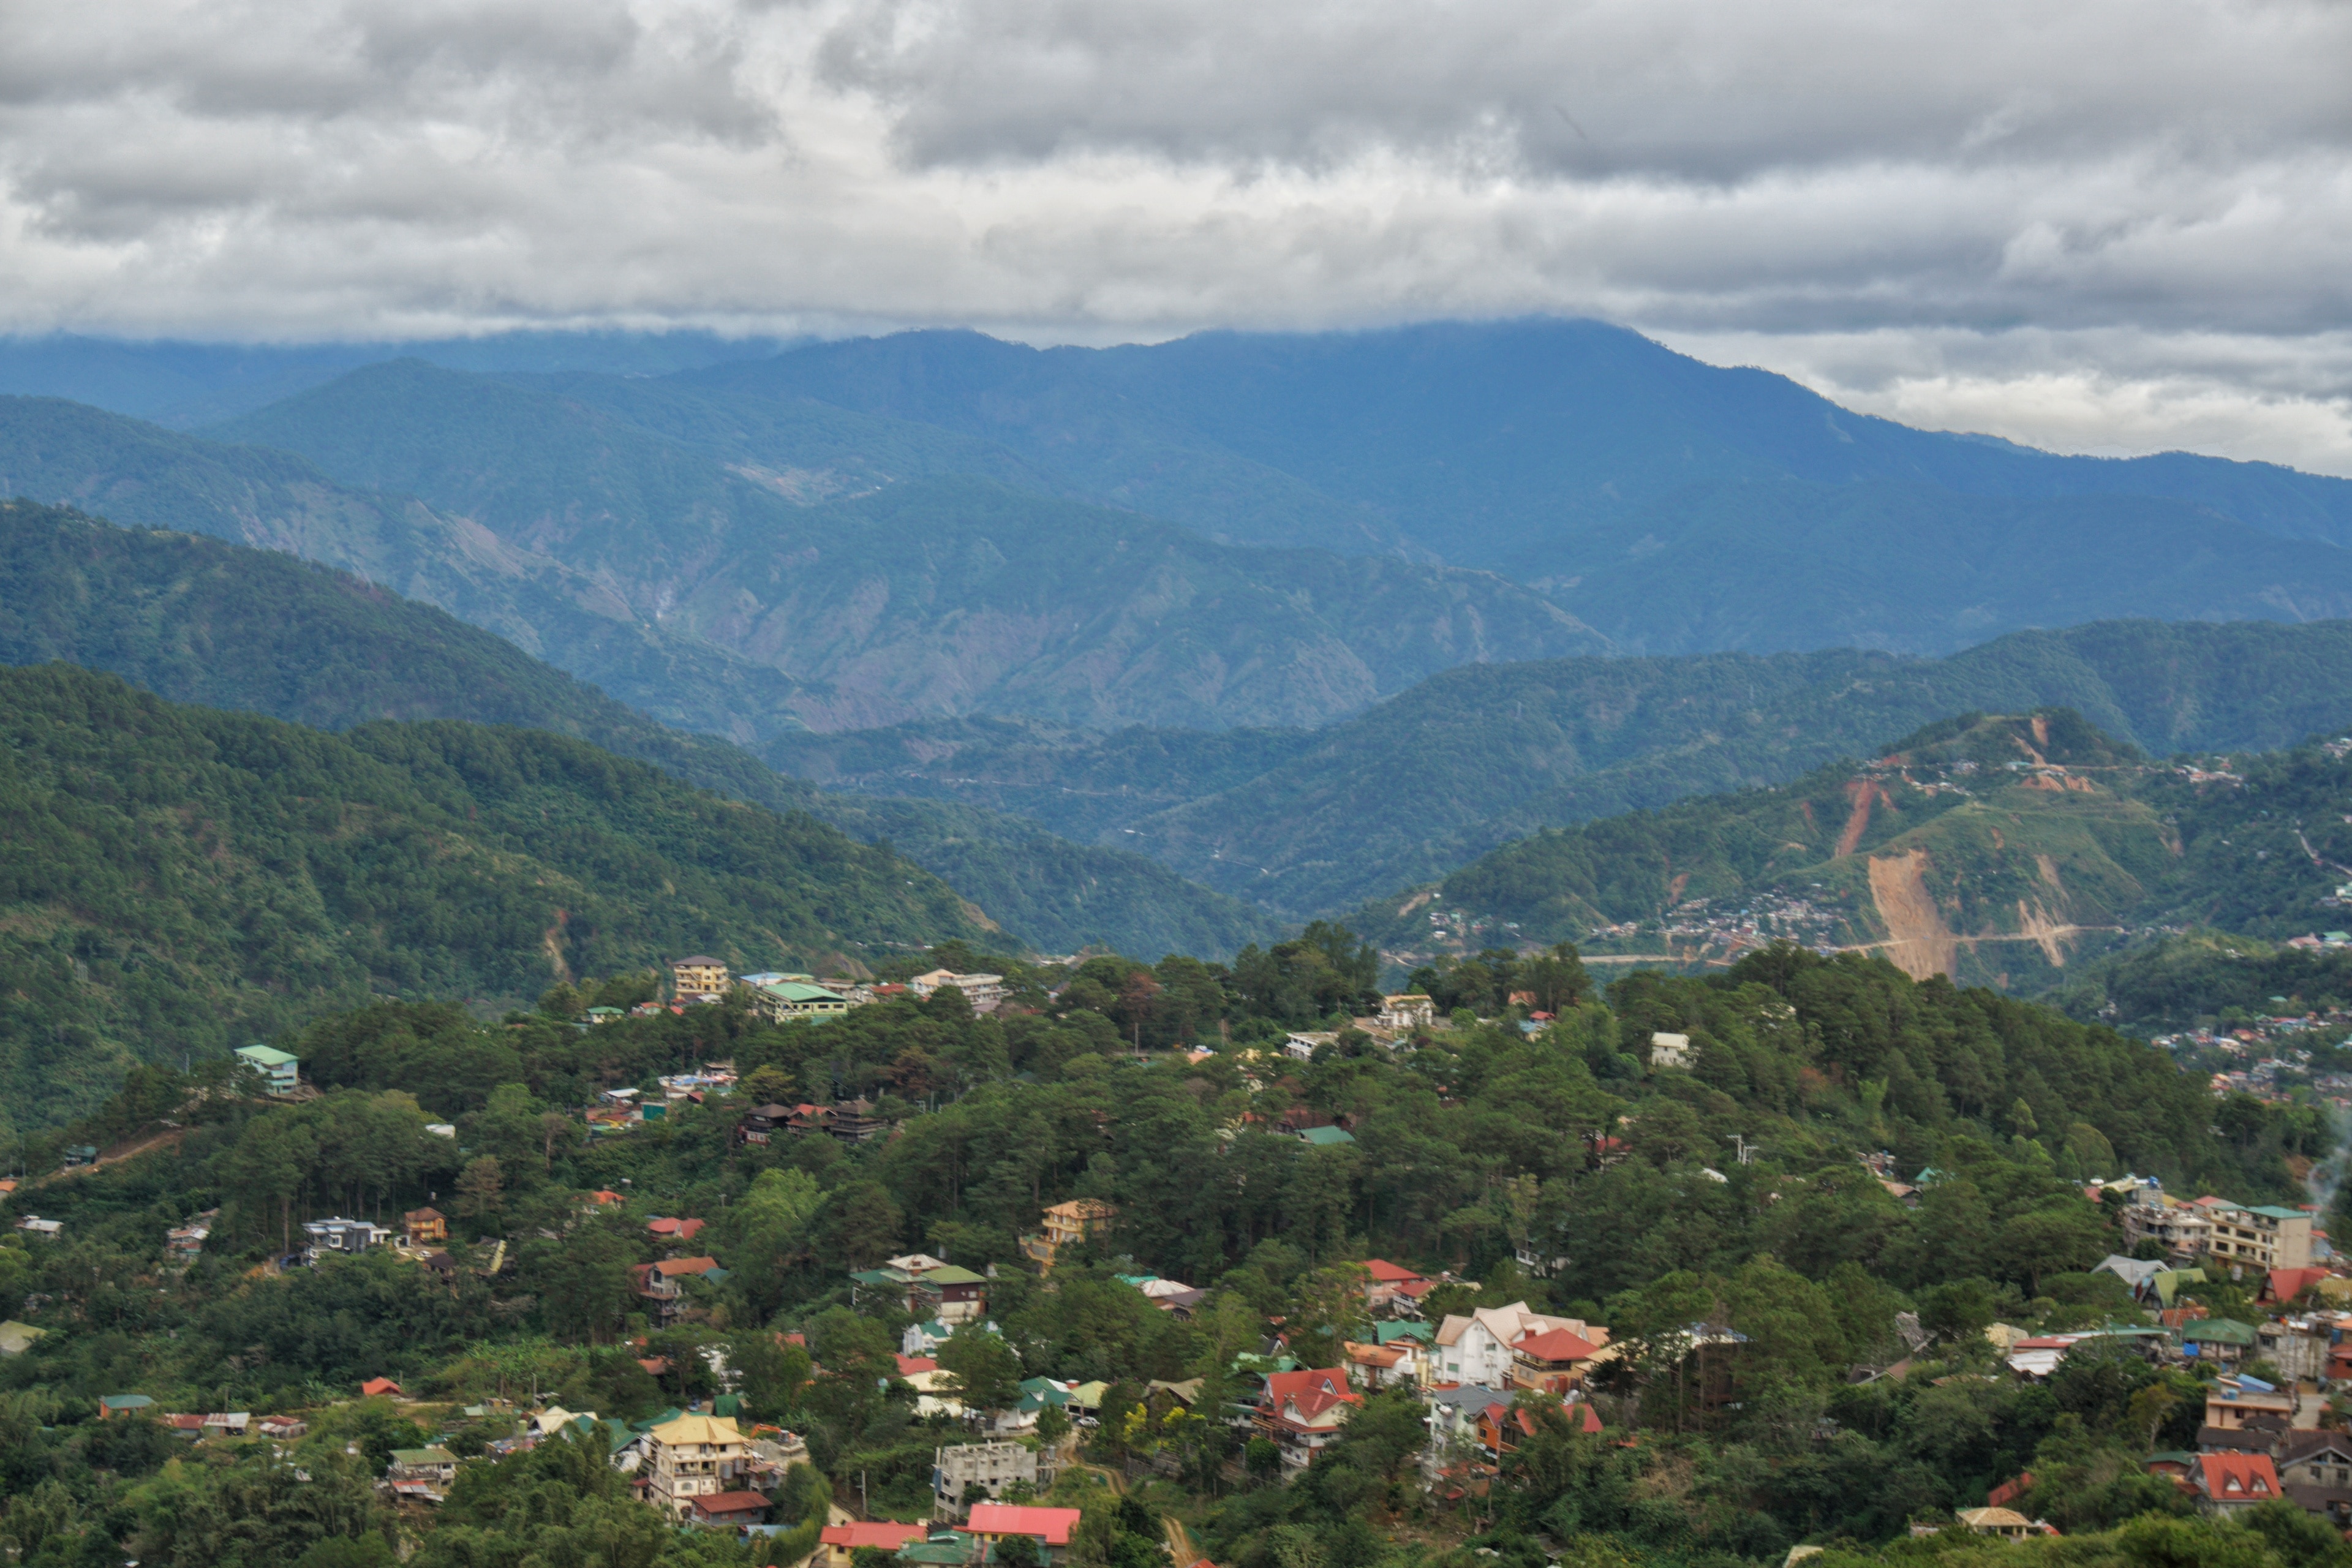 The mountains of Benguet in the Philippines